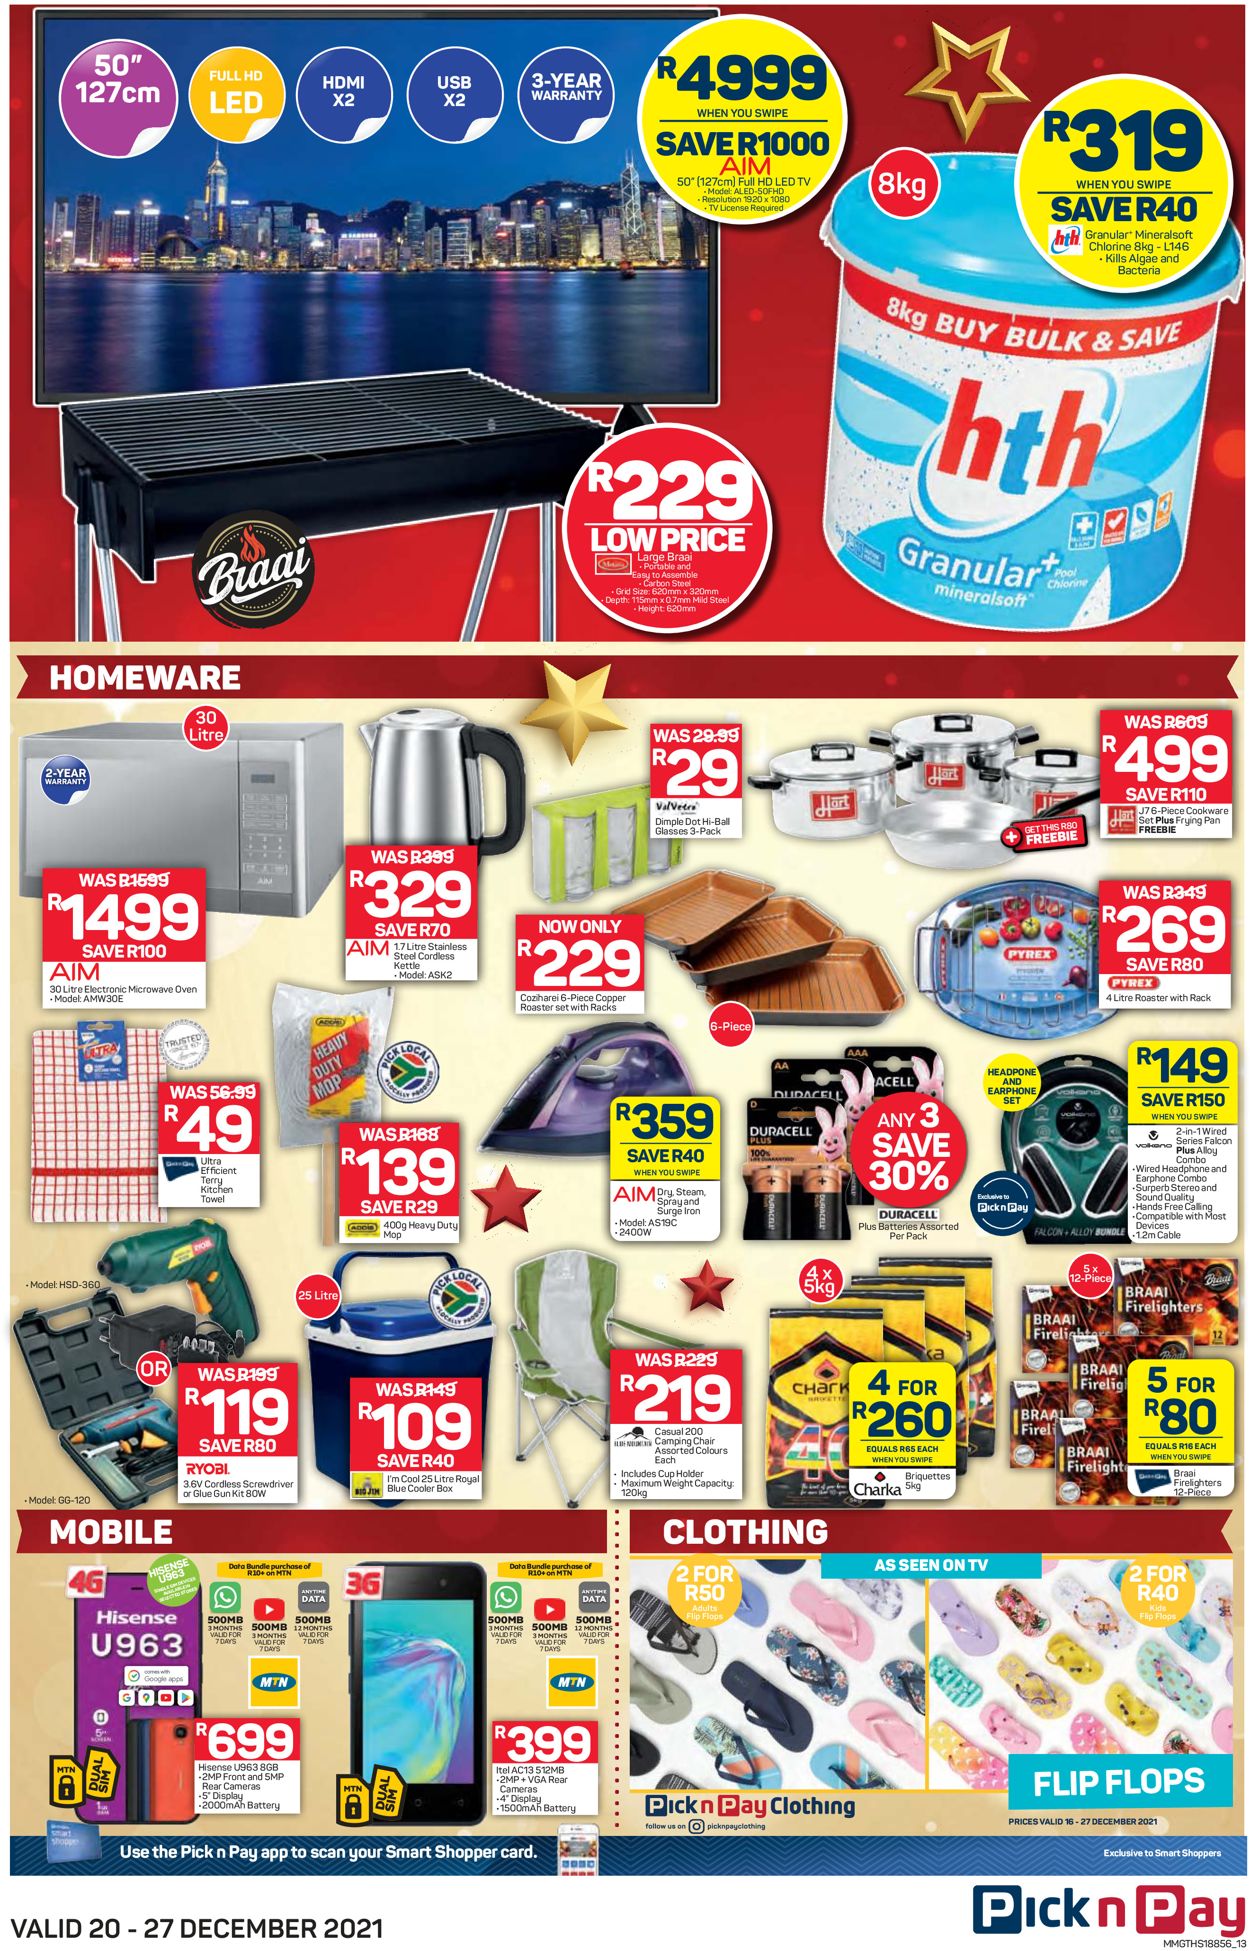 Pick n Pay Catalogue - 2021/12/20-2021/12/27 (Page 13)